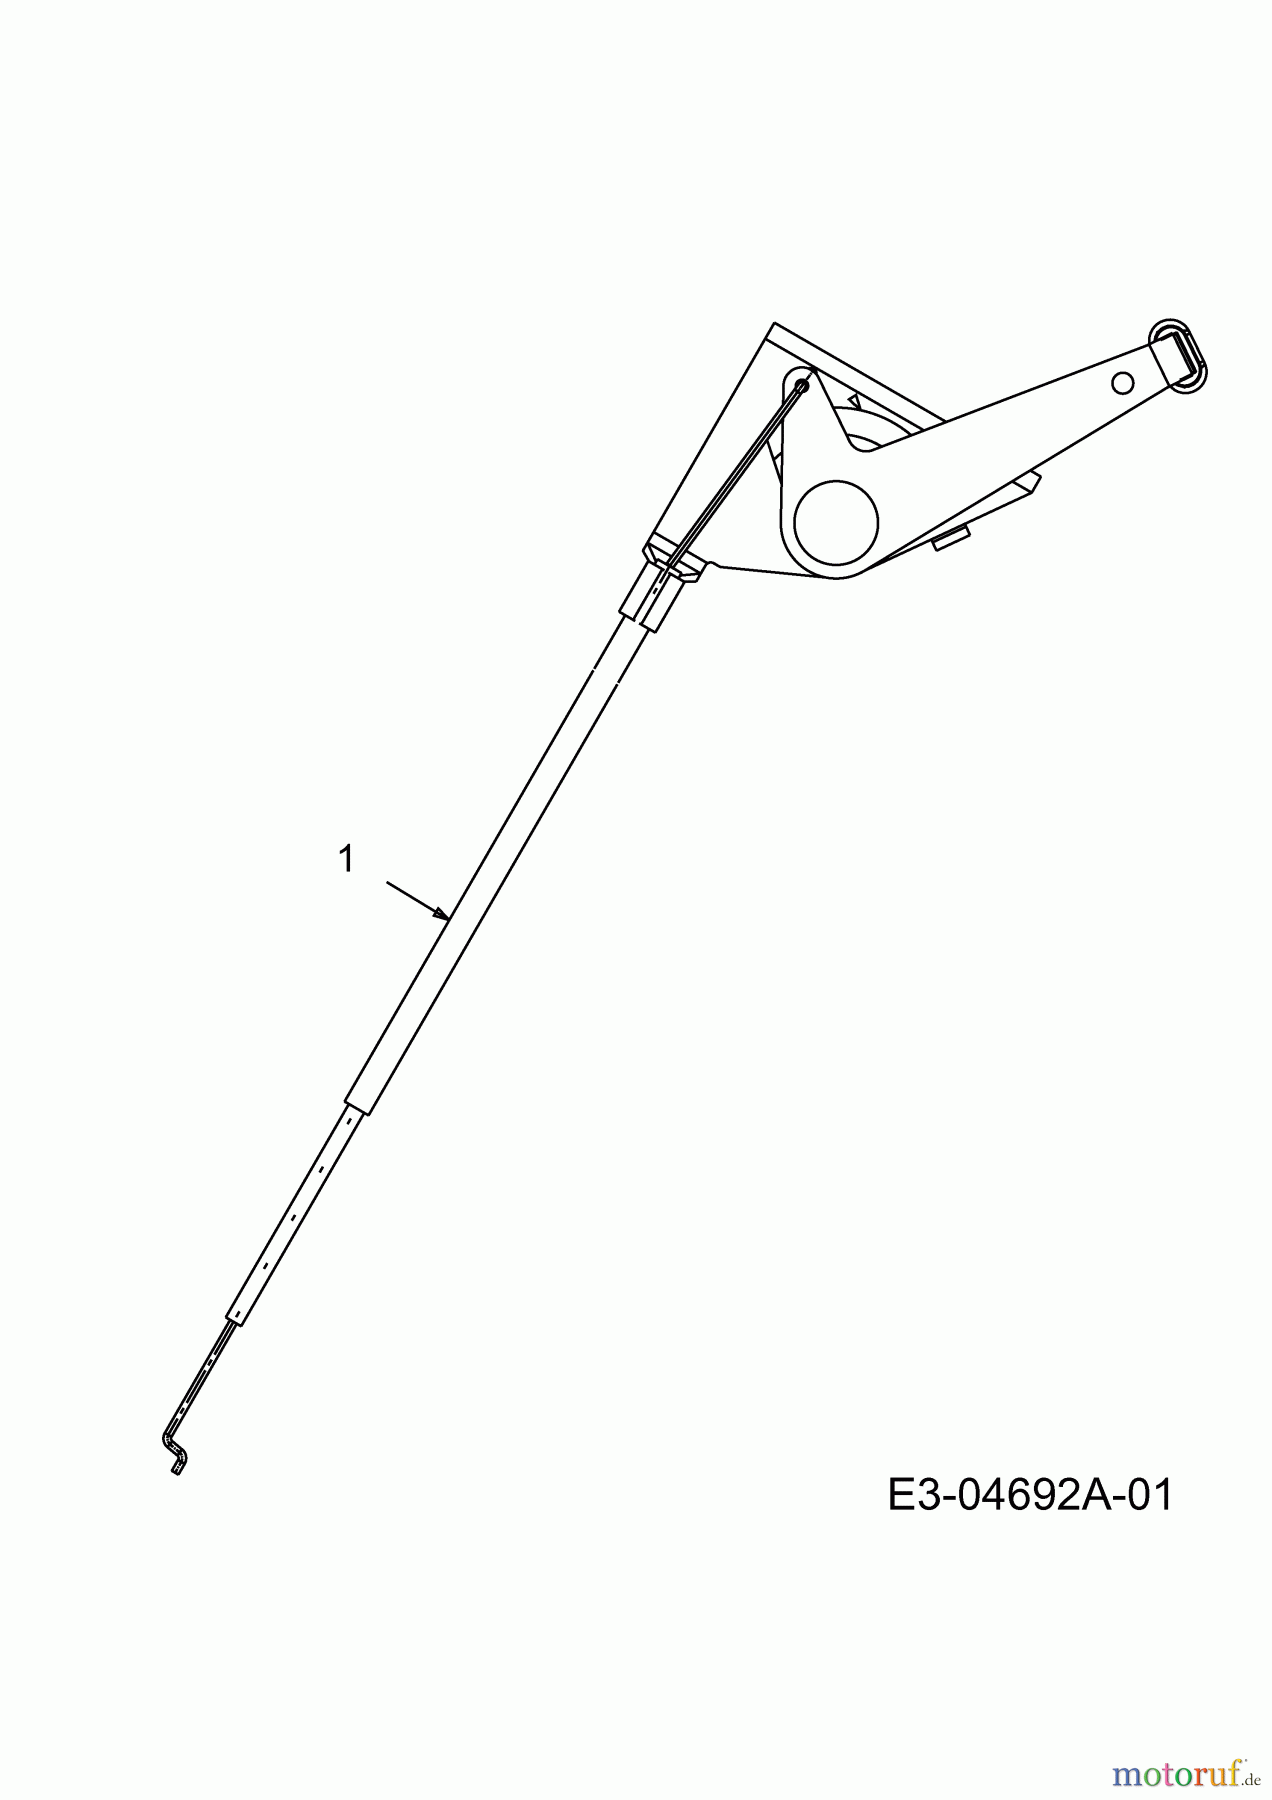  Motec Lawn tractors MTBS 500 Y 13AA692F640  (2004) Throttle cable